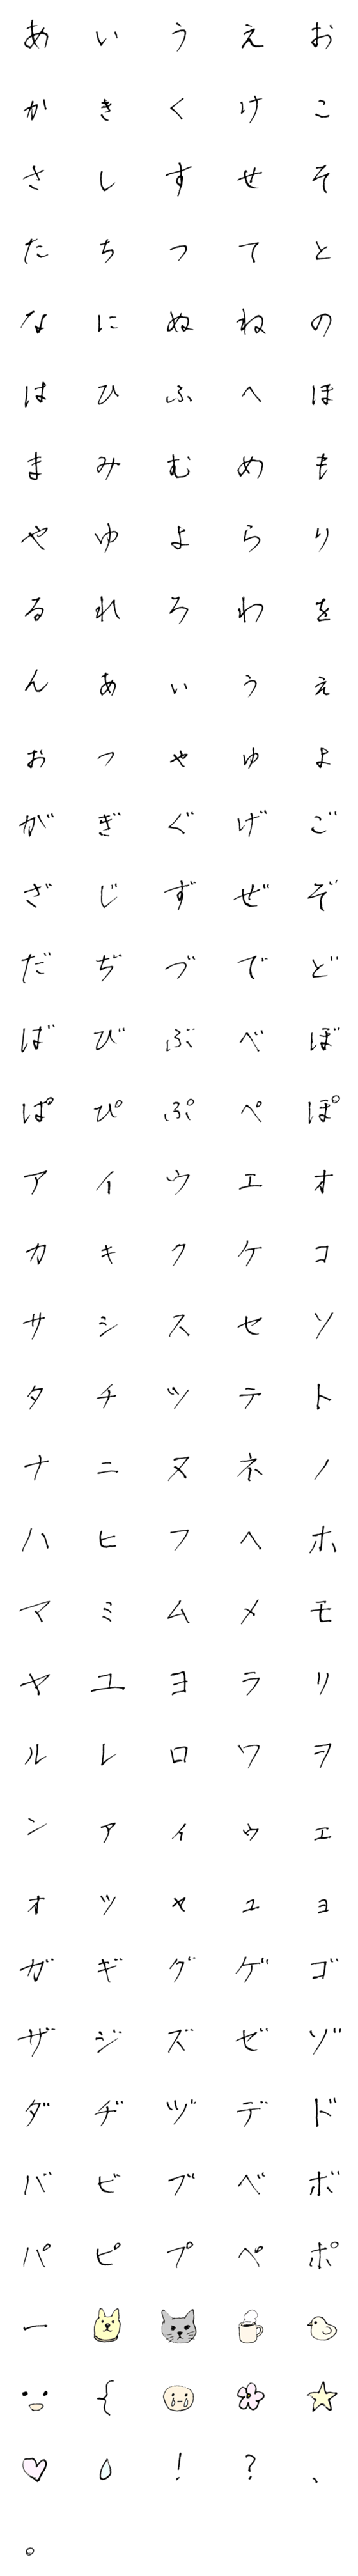 [LINE絵文字]手書きの文字の画像一覧